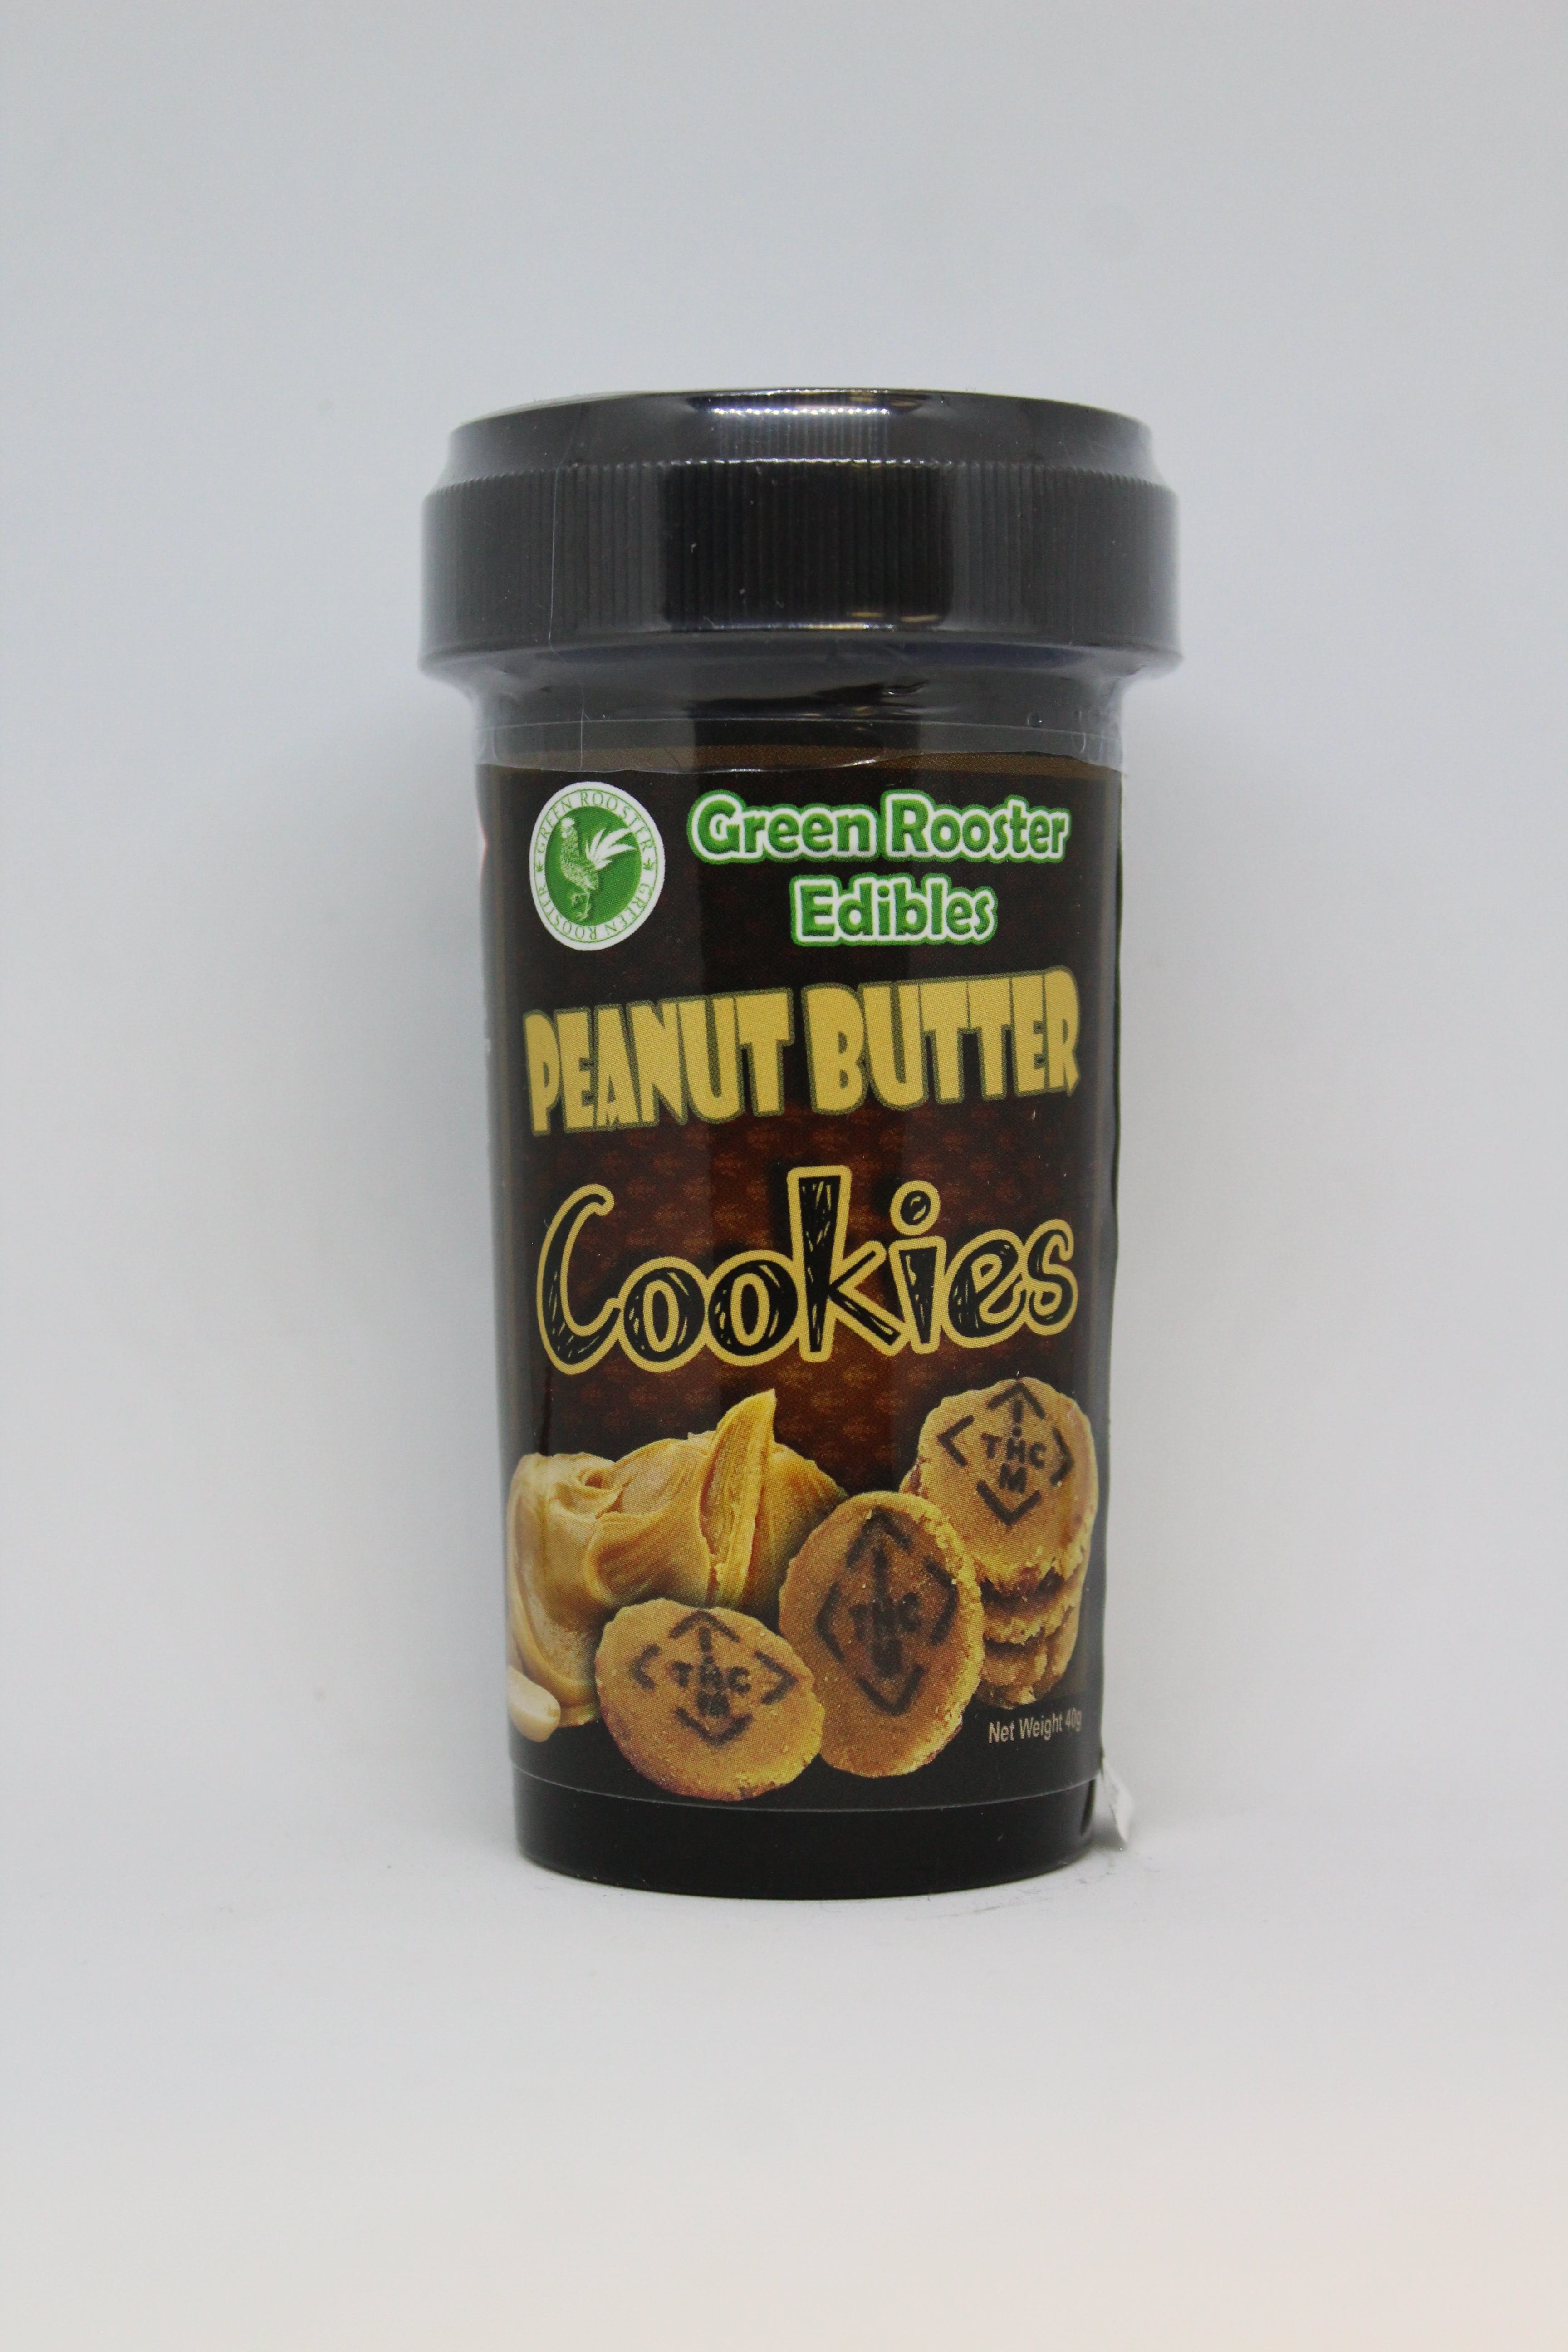 edible-green-rooster-peanut-butter-250-mg-cookies-tax-not-included